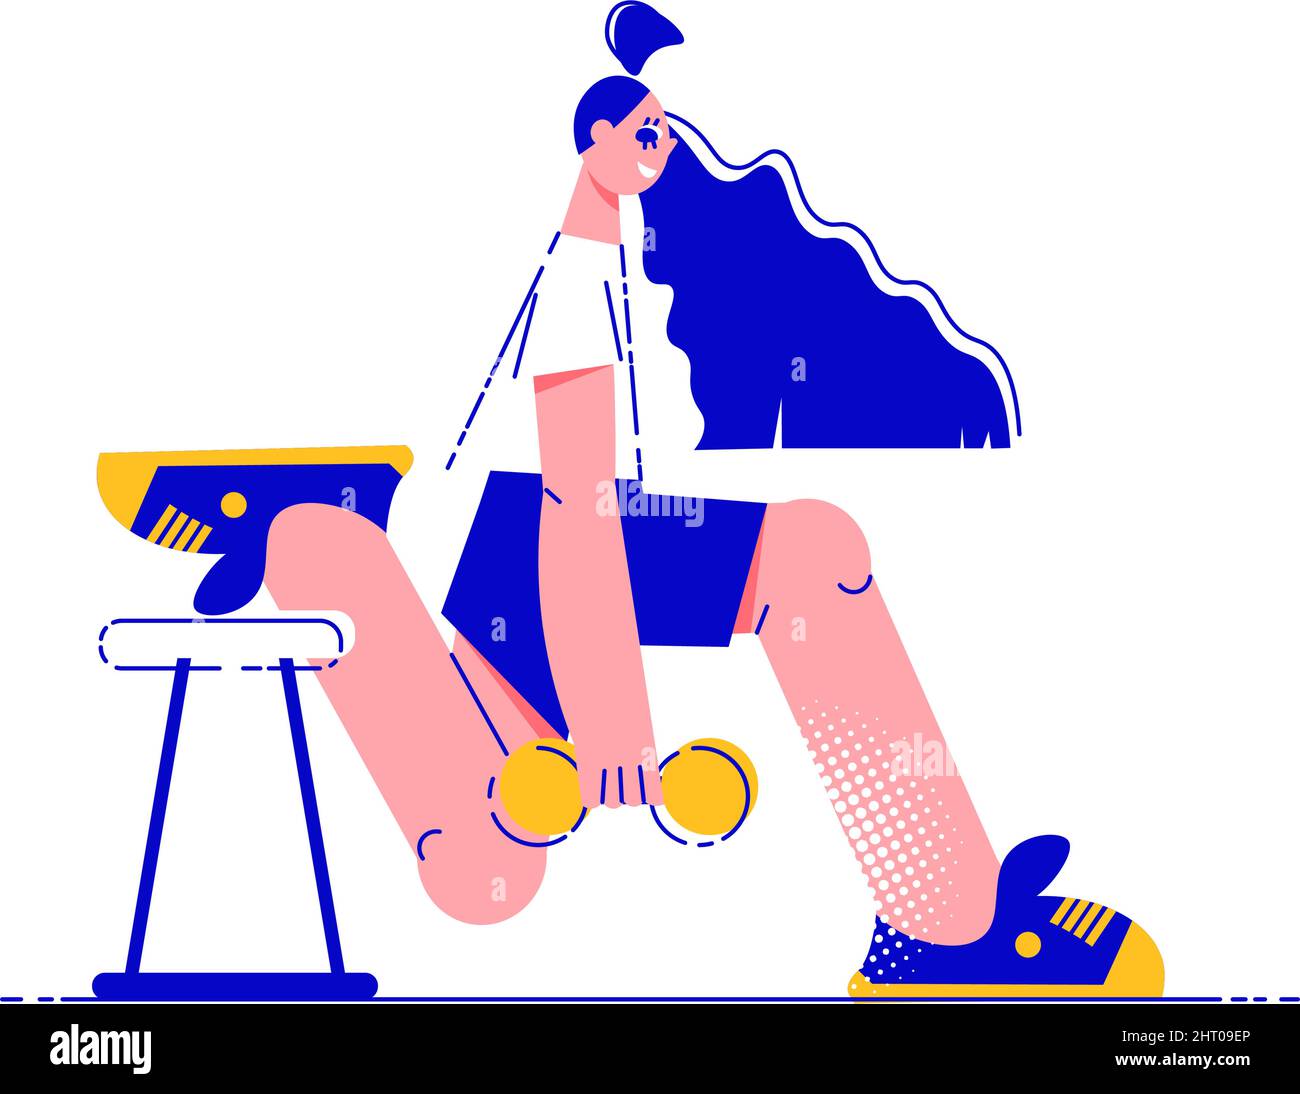 Fitness People Flat Composition With Character Of Girl Stretching Legs Holding Barbell Vector